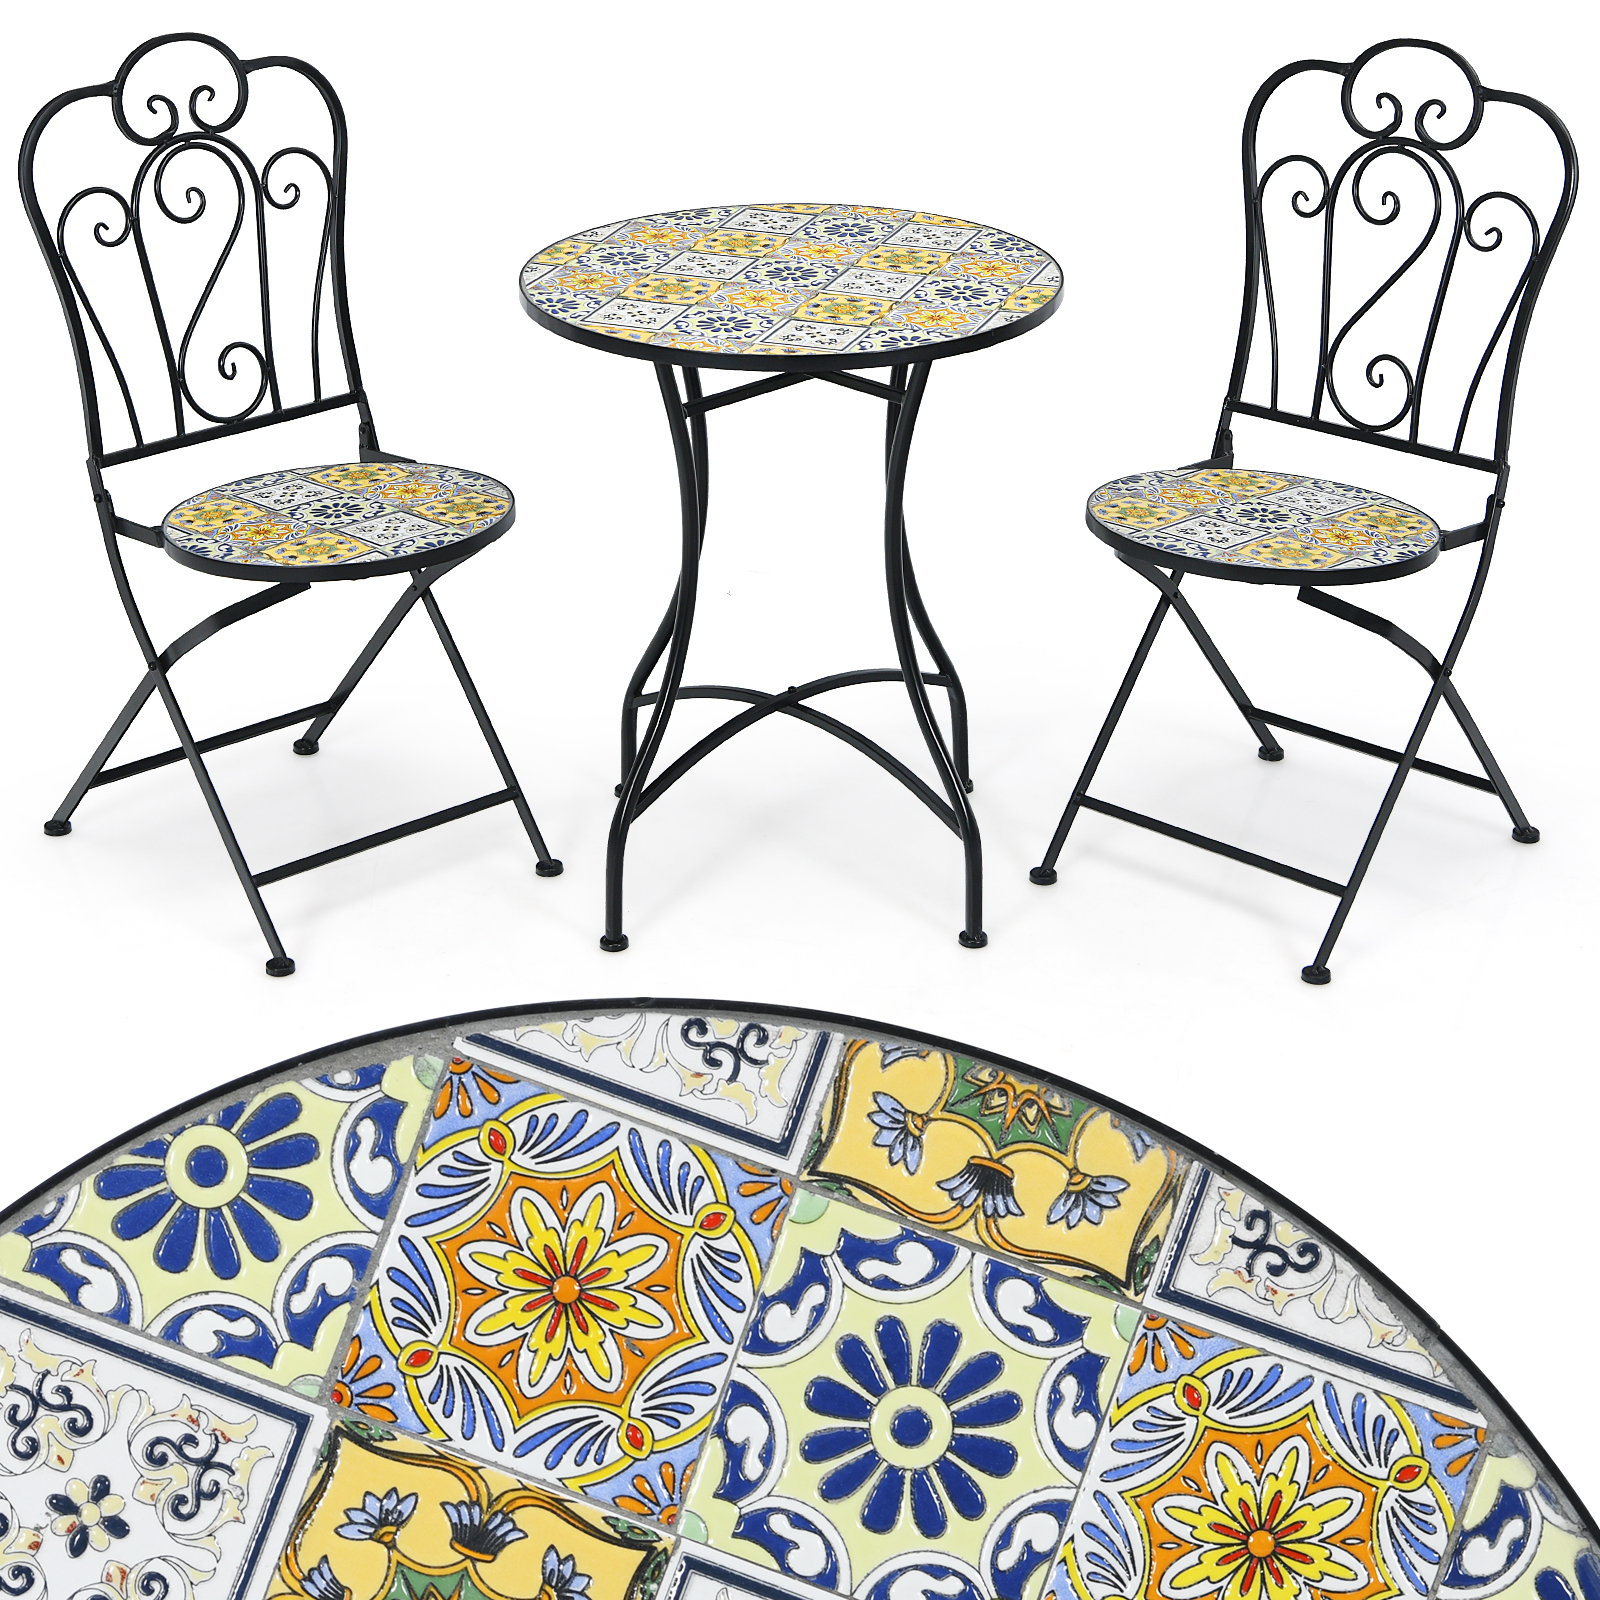 Patiojoy 3PCS Patio Mosaic Design Folding Chairs Side Table Set Bistro Set Classic Furniture Chair Set for Garden - image 2 of 8